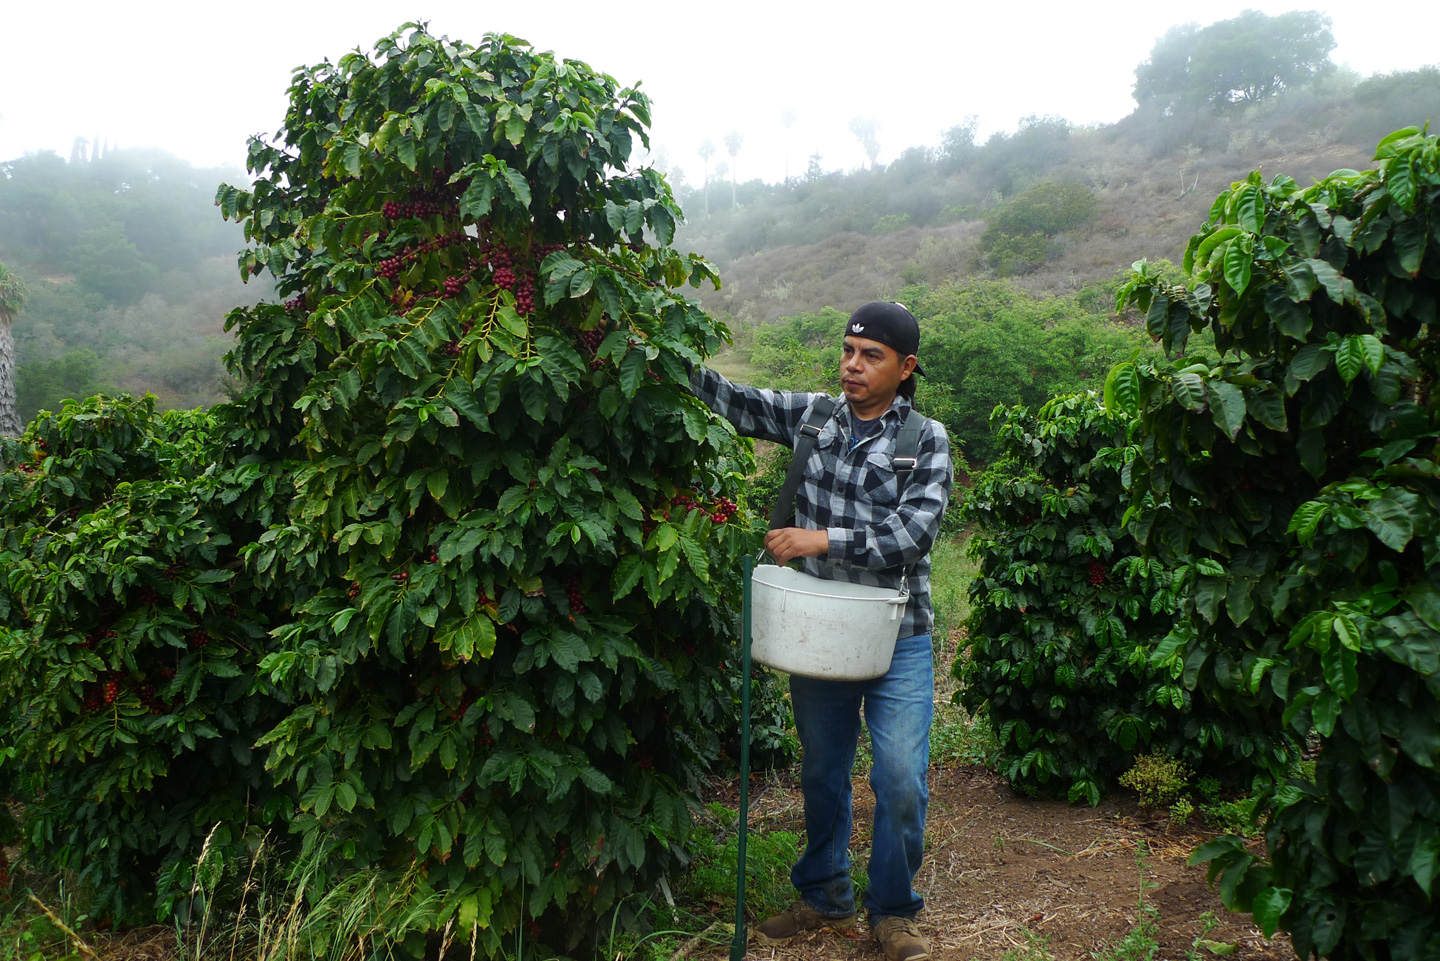 Sammy Venegas leads a crew of workers harvesting coffee at Good Land Organics.  He comes from a long line of Oaxacan coffee growers and harvesters. (Lisa Morehouse/KQED)